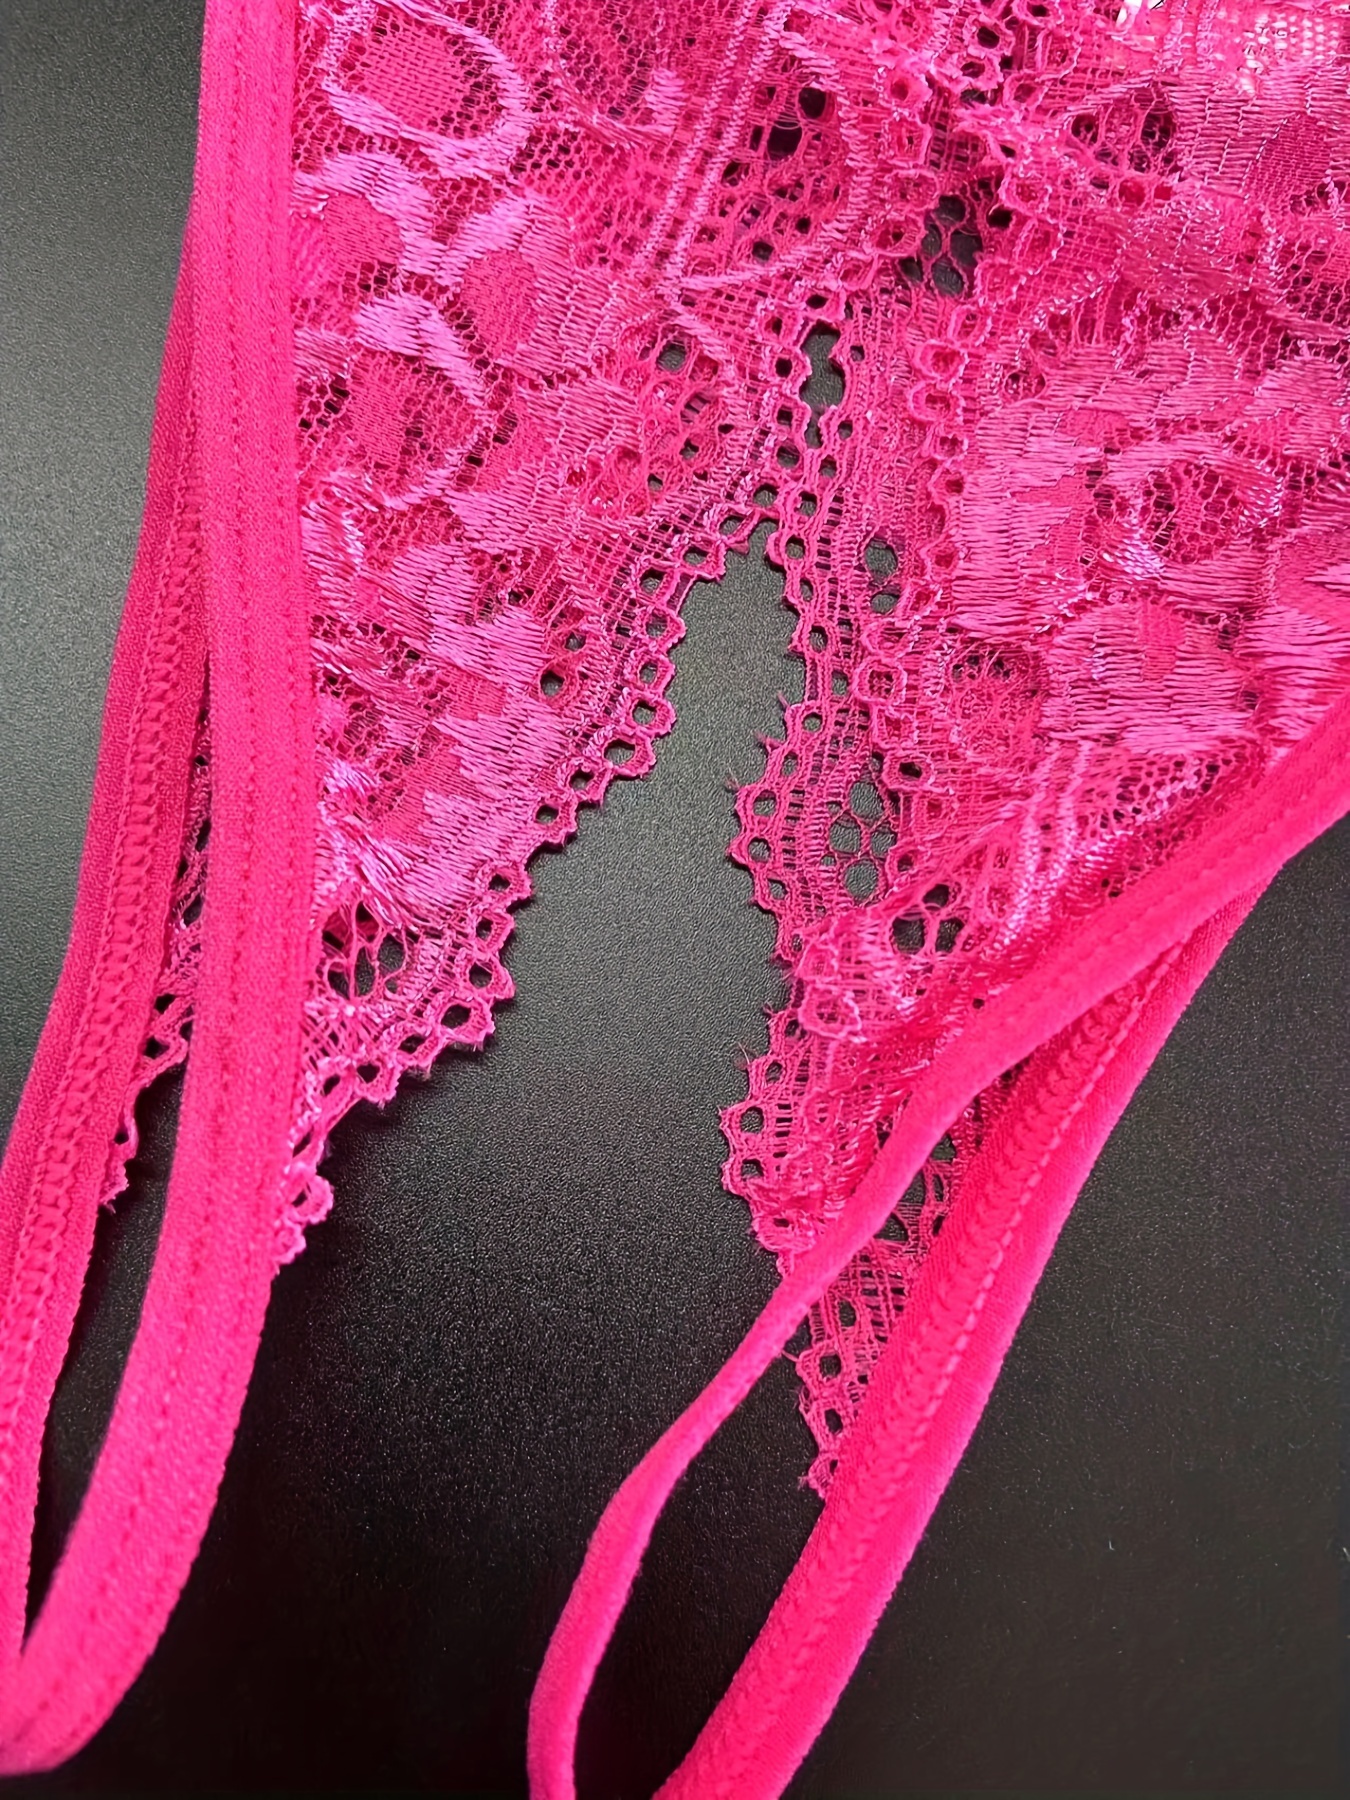 WOMENS SEXY HOT PINK OPEN CROTCH CROTCHLESS KNICKERS / PANTIES